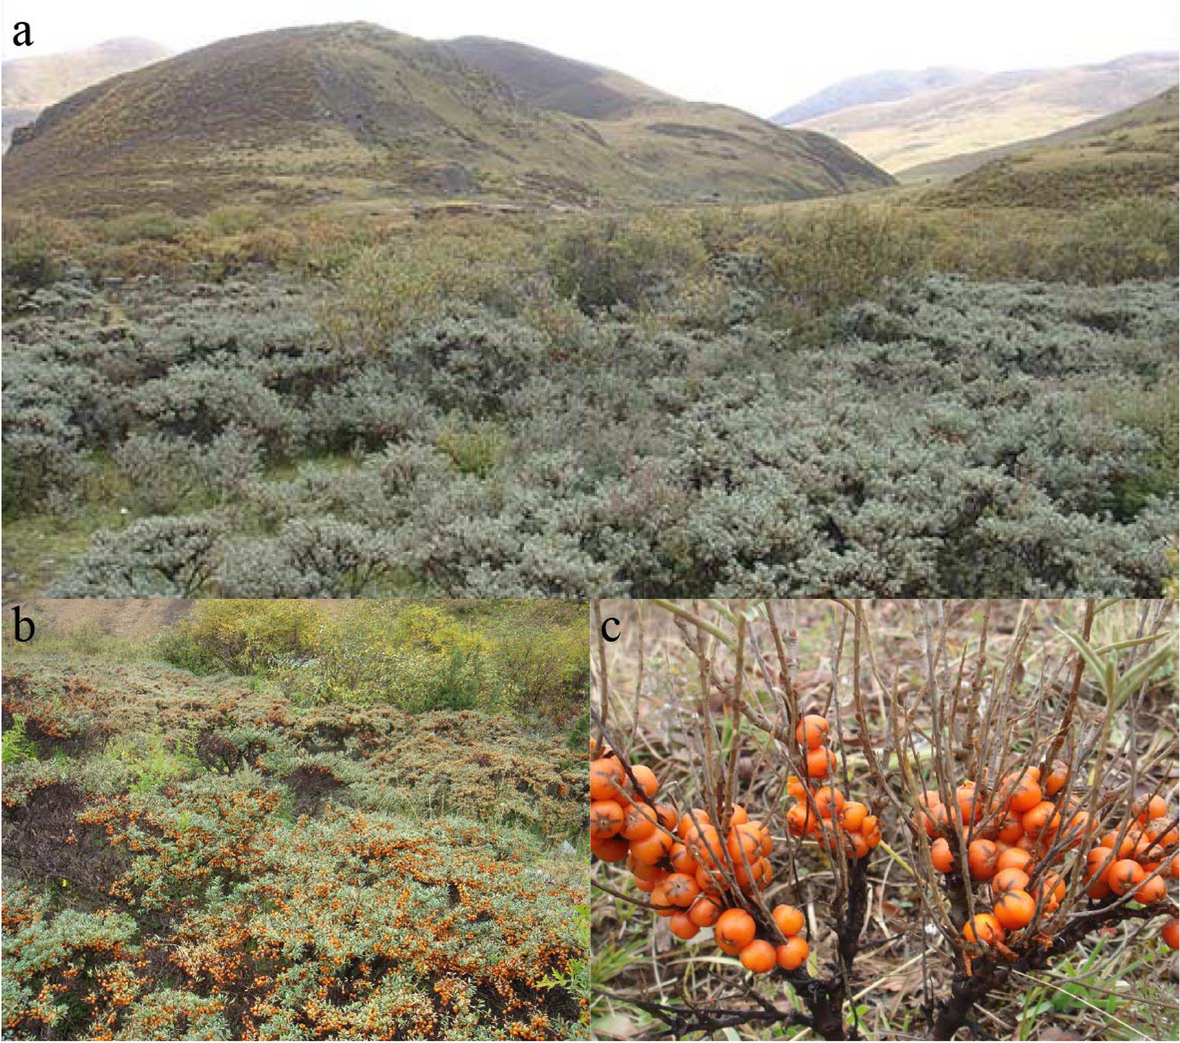 Chromosome-level genome assembly of Hippophae tibetana provides insights into high-altitude adaptation and flavonoid biosynthesis